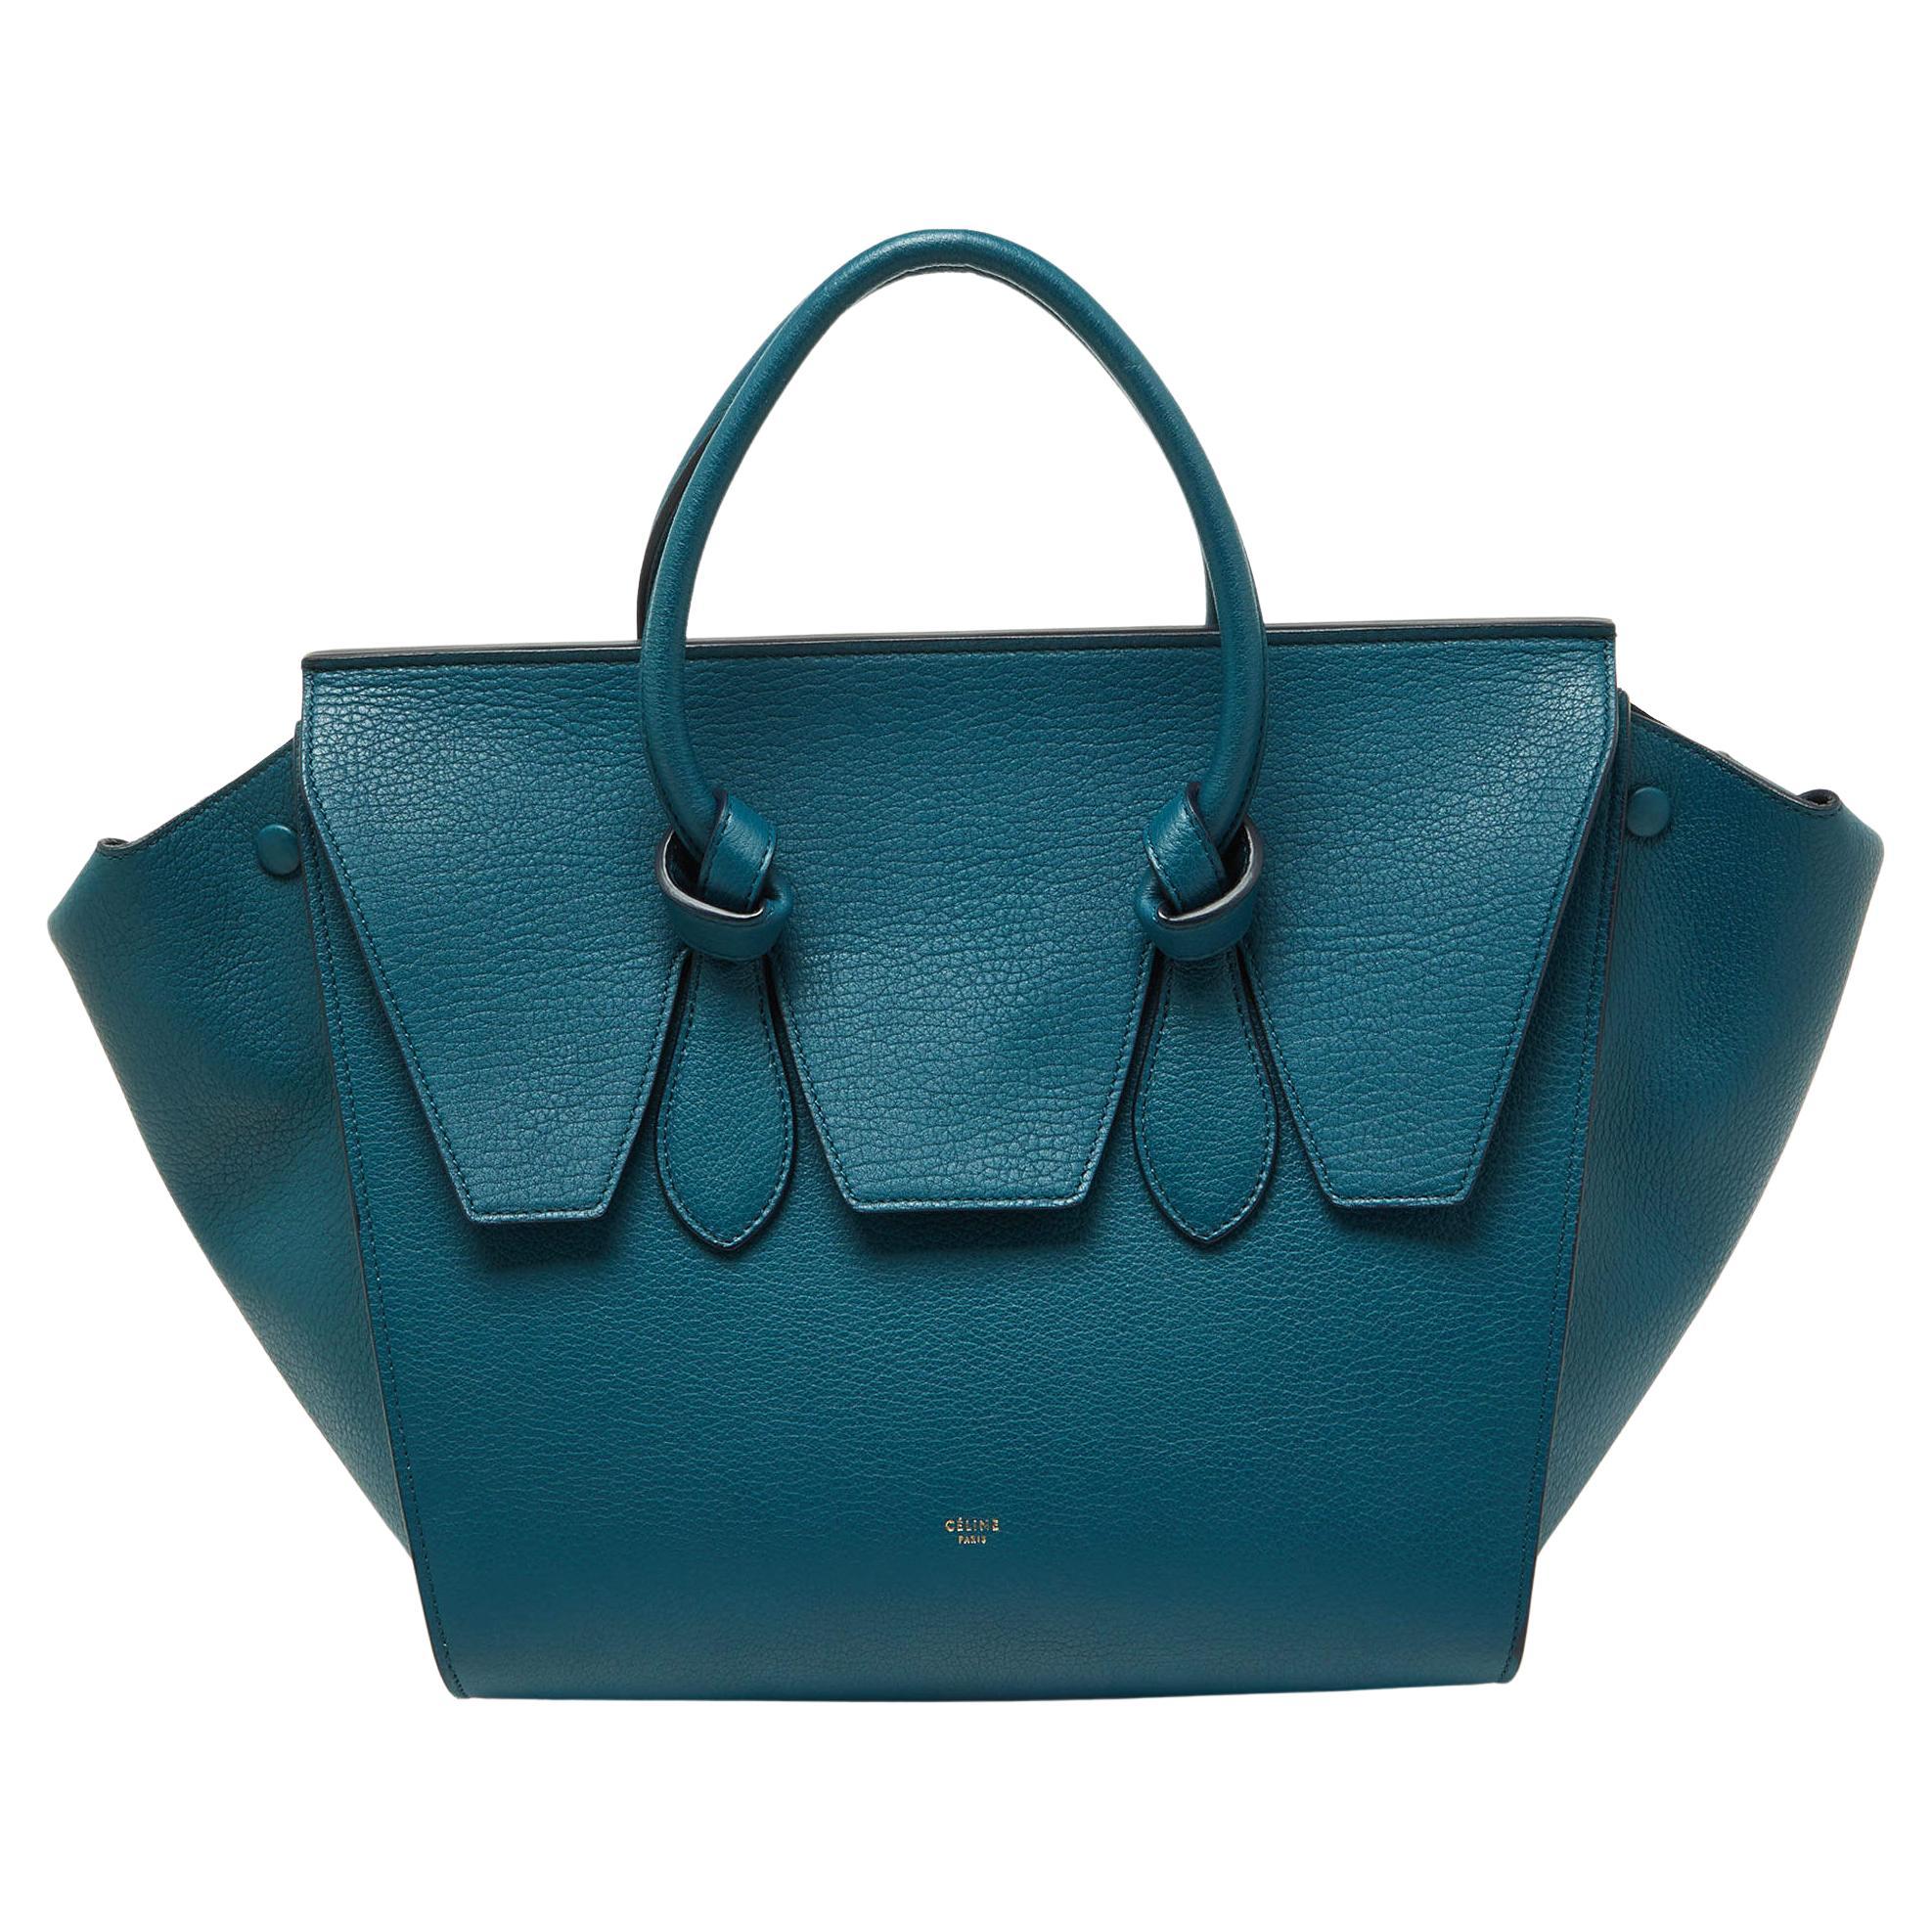 Celine Teal Blue Leather Small Tie Tote For Sale